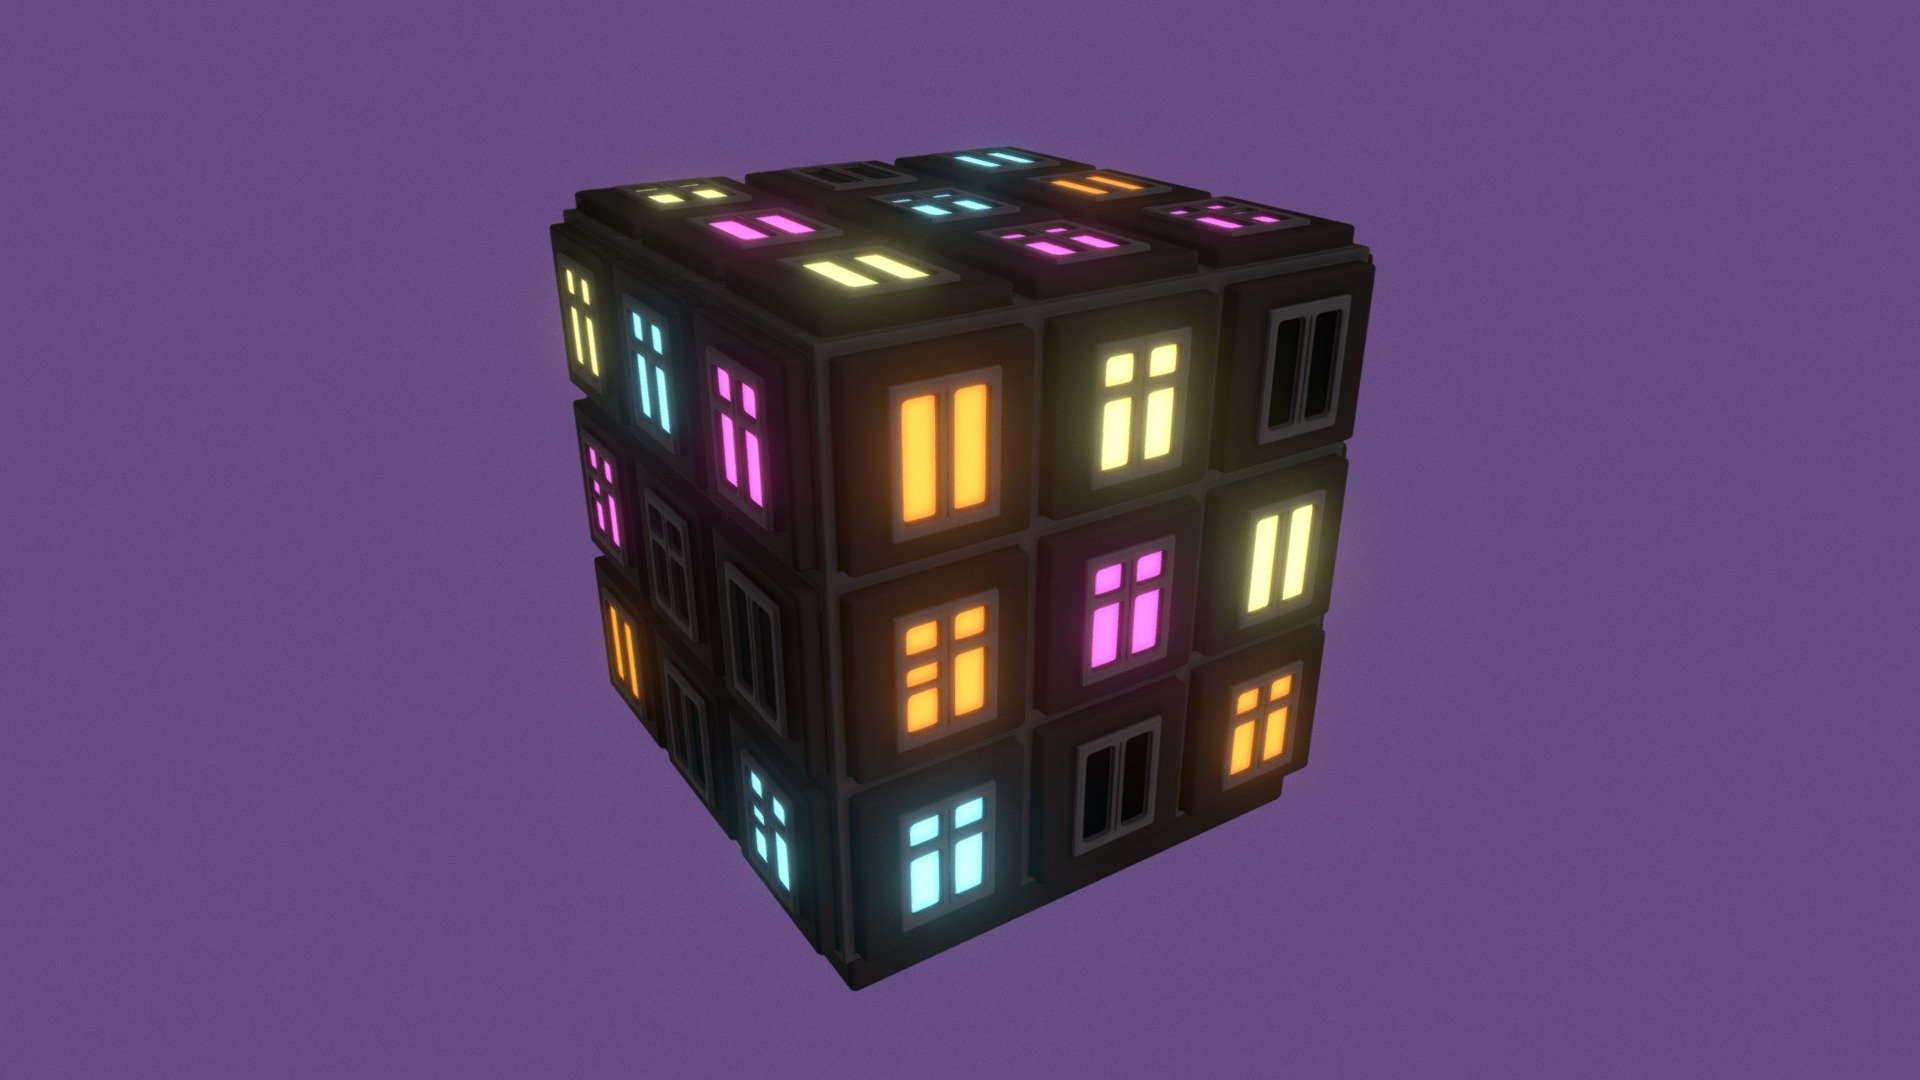 SketchfabWeeklyChallenge2023
Collect all the faces with the same window color! - Rubik's Cube "PANELKI" - 3D model by duaduaPeter 3d model